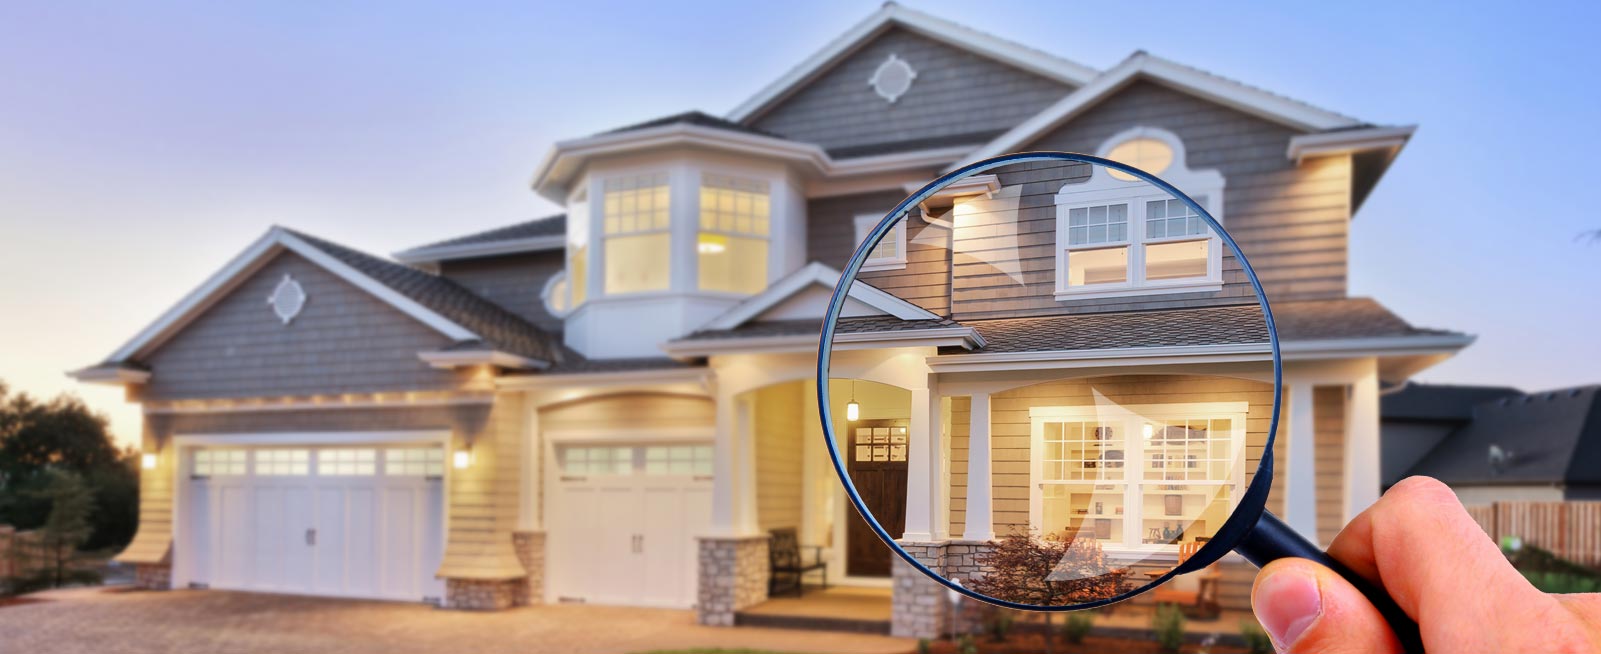  Beyond the Surface: 5 Often-Overlooked Factors in Home Inspections That Could Cost You